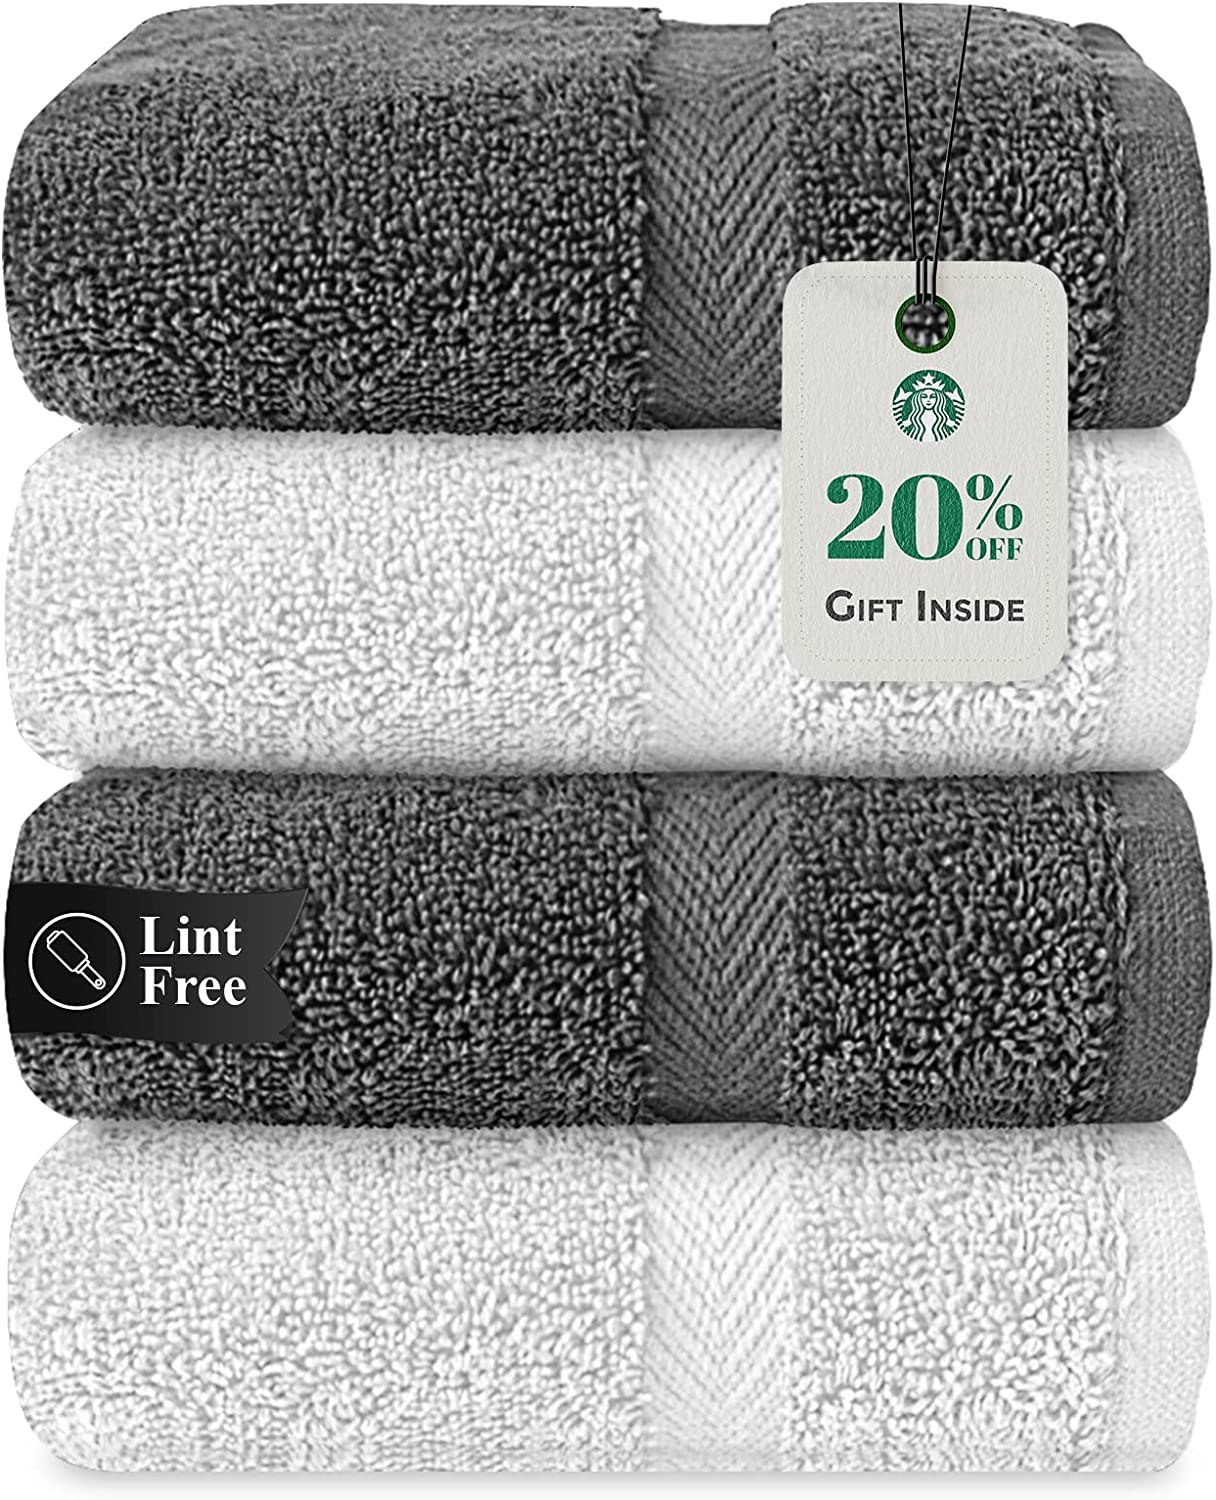 Stony Edge Towel Set, 2 Bath Towel, 2 Hand Towel & 2 Face Towels, 100% Cotton, 600 GSM, Soft & Absorbent for Bathroom, Kitchen, Gym & Spa, White & Navy Blue